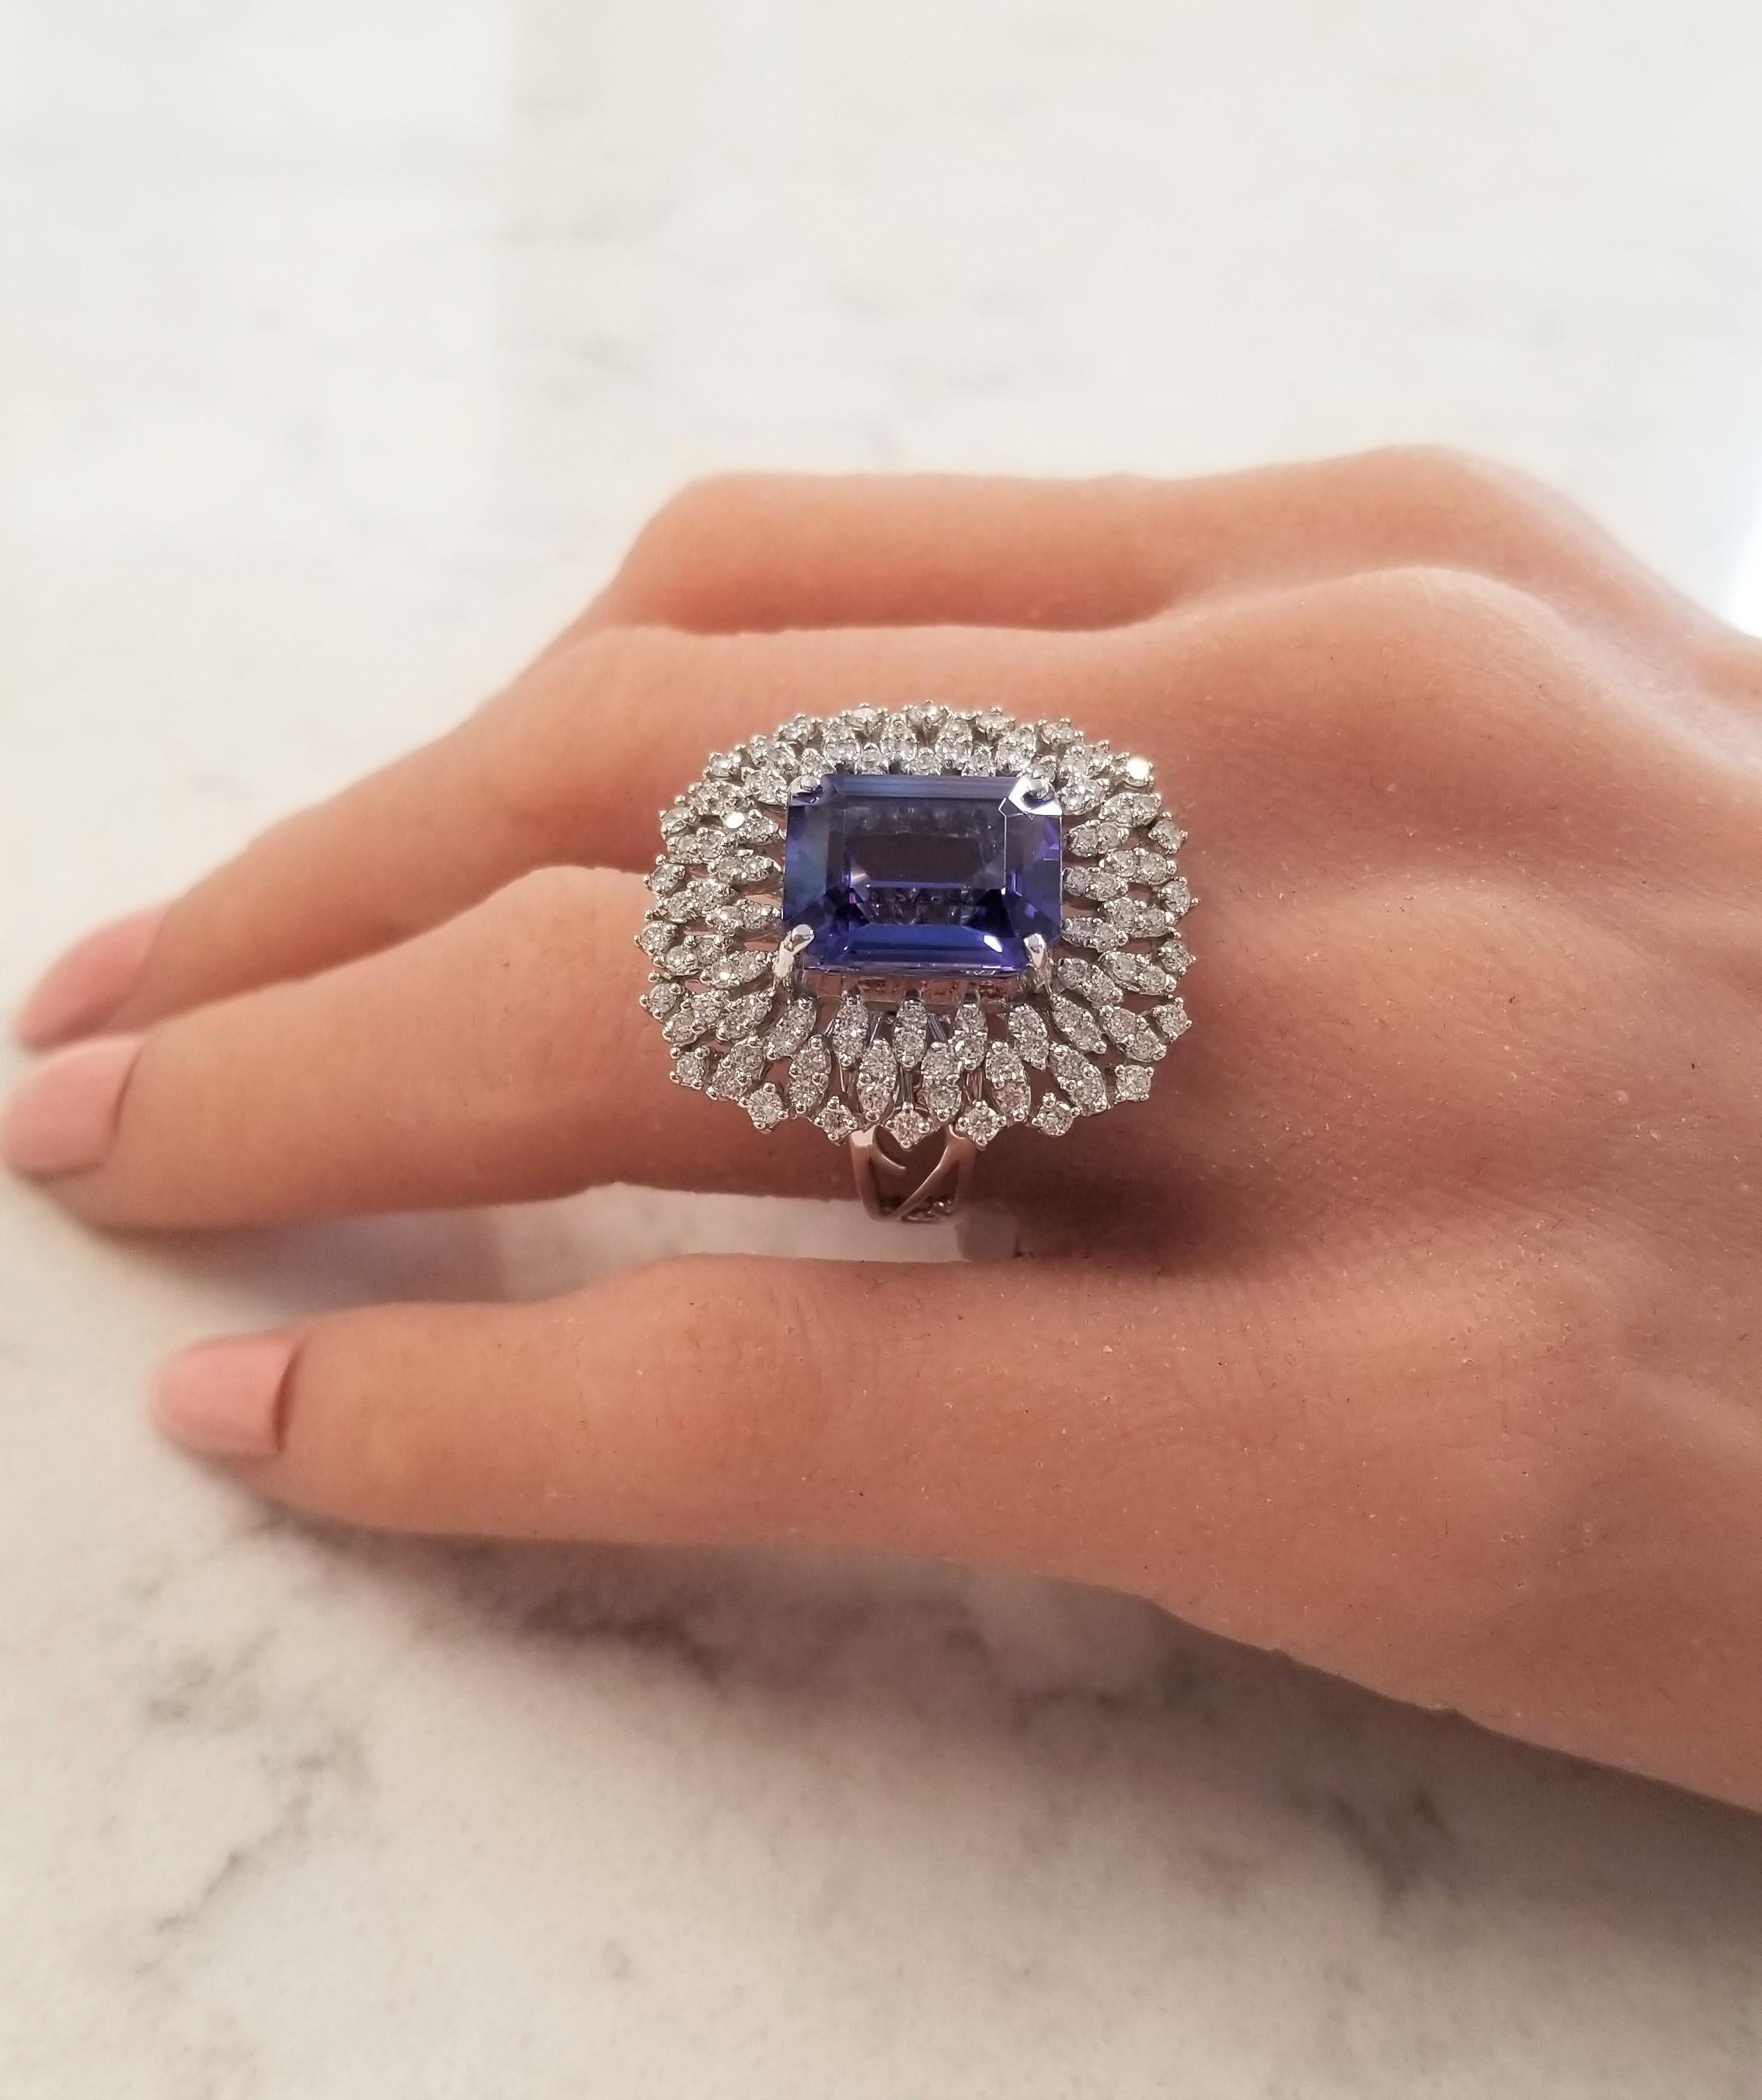 This is a ring that has incredible coverage. A beautiful 8.62 carat bold blue-violet tanzanite sourced near the foothills of Mt. Kilimanjaro in Tanzania is center. It measures 10.40 x 13.50mm and is fashioned into an emerald cut. Its vivid color,